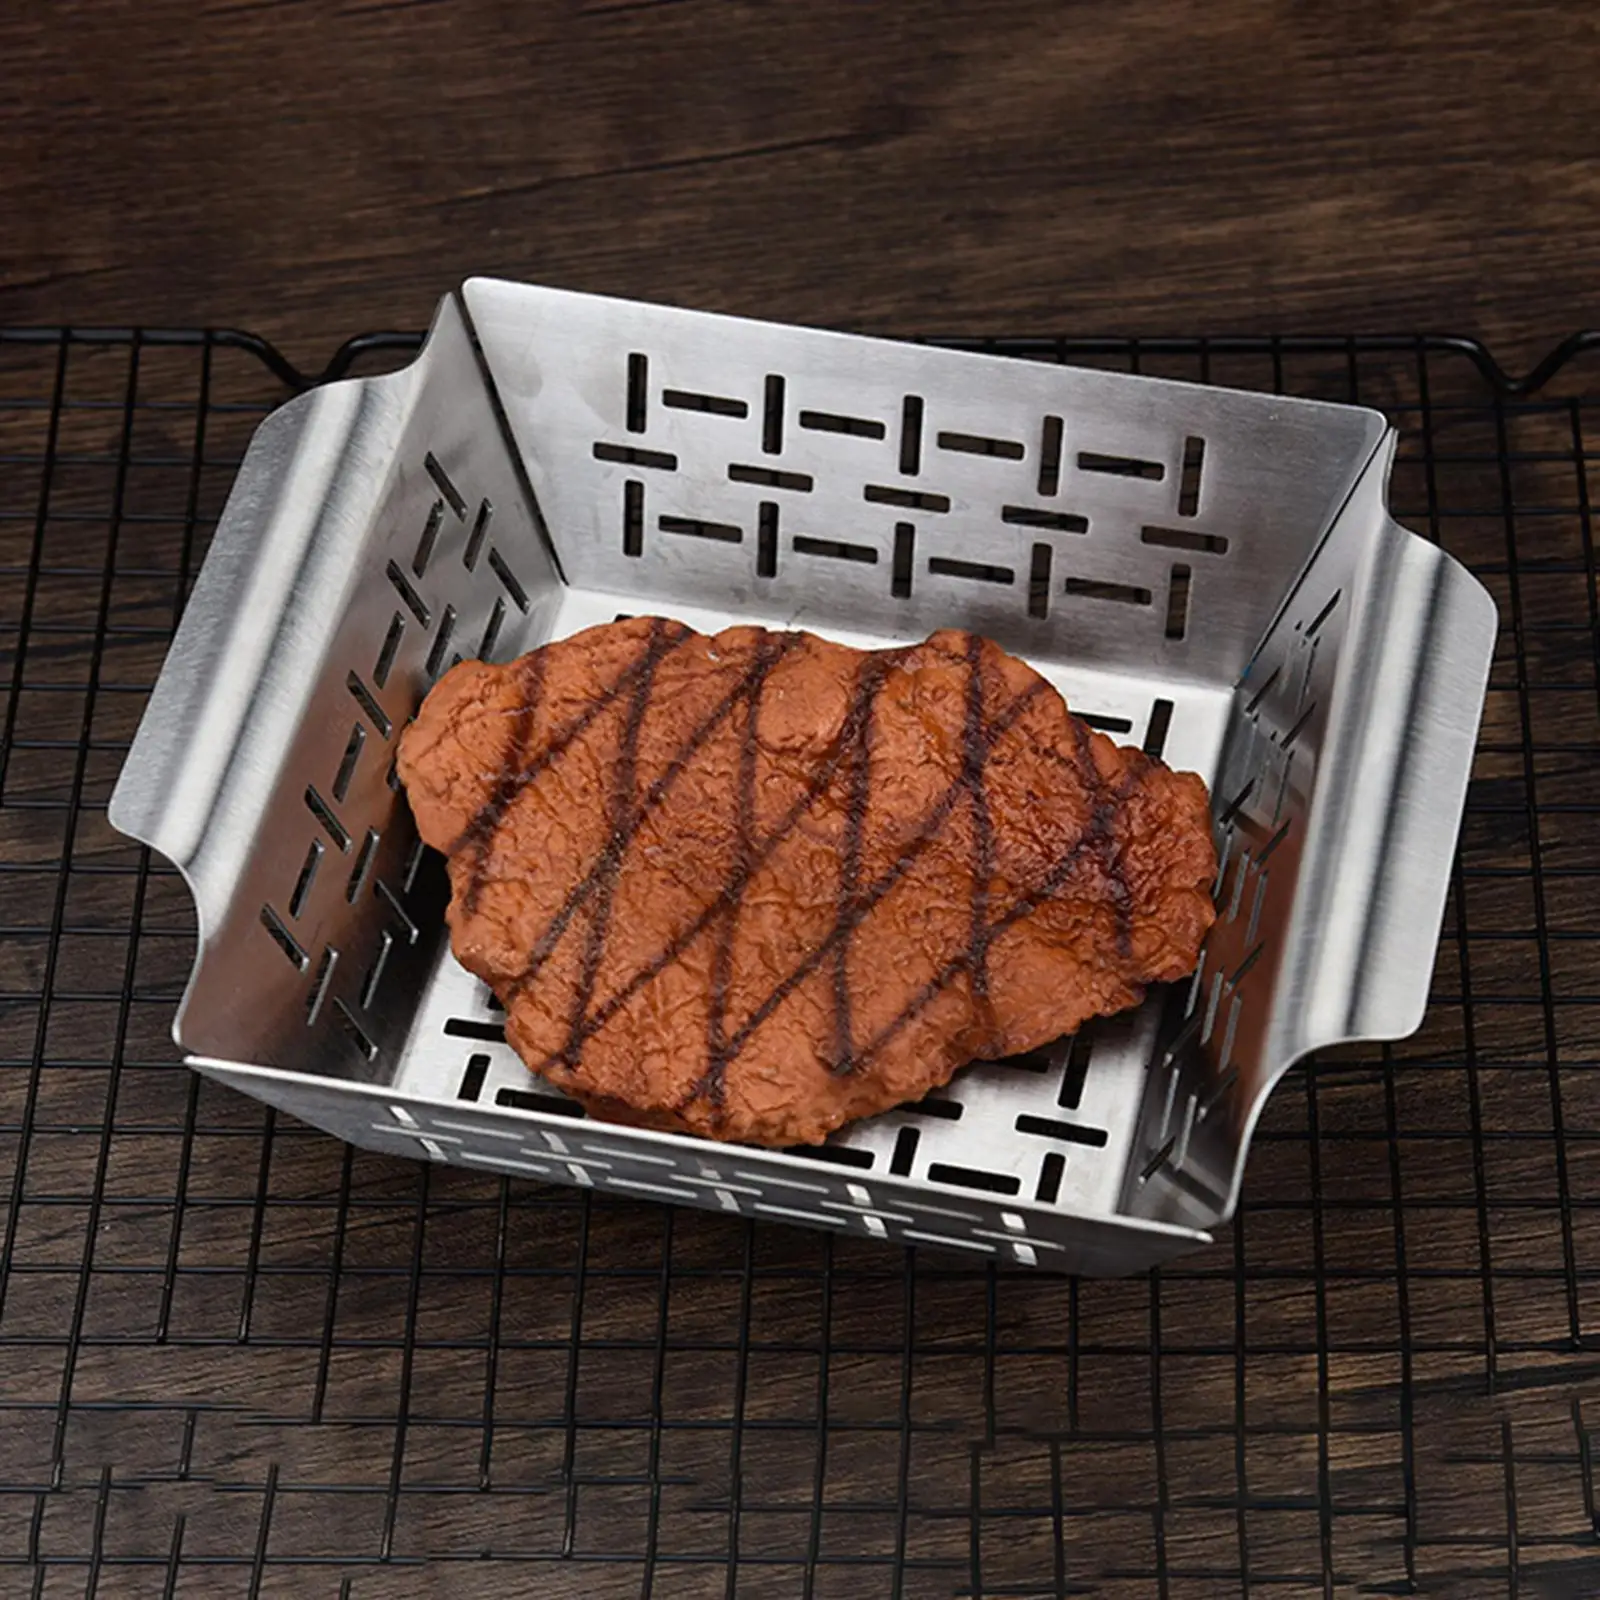 Stainless Steel Roast Fish Grilling Basket BBQ Grill Pan BBQ Accessories Grilling Bowl Grill Barbecue Plate Leakage